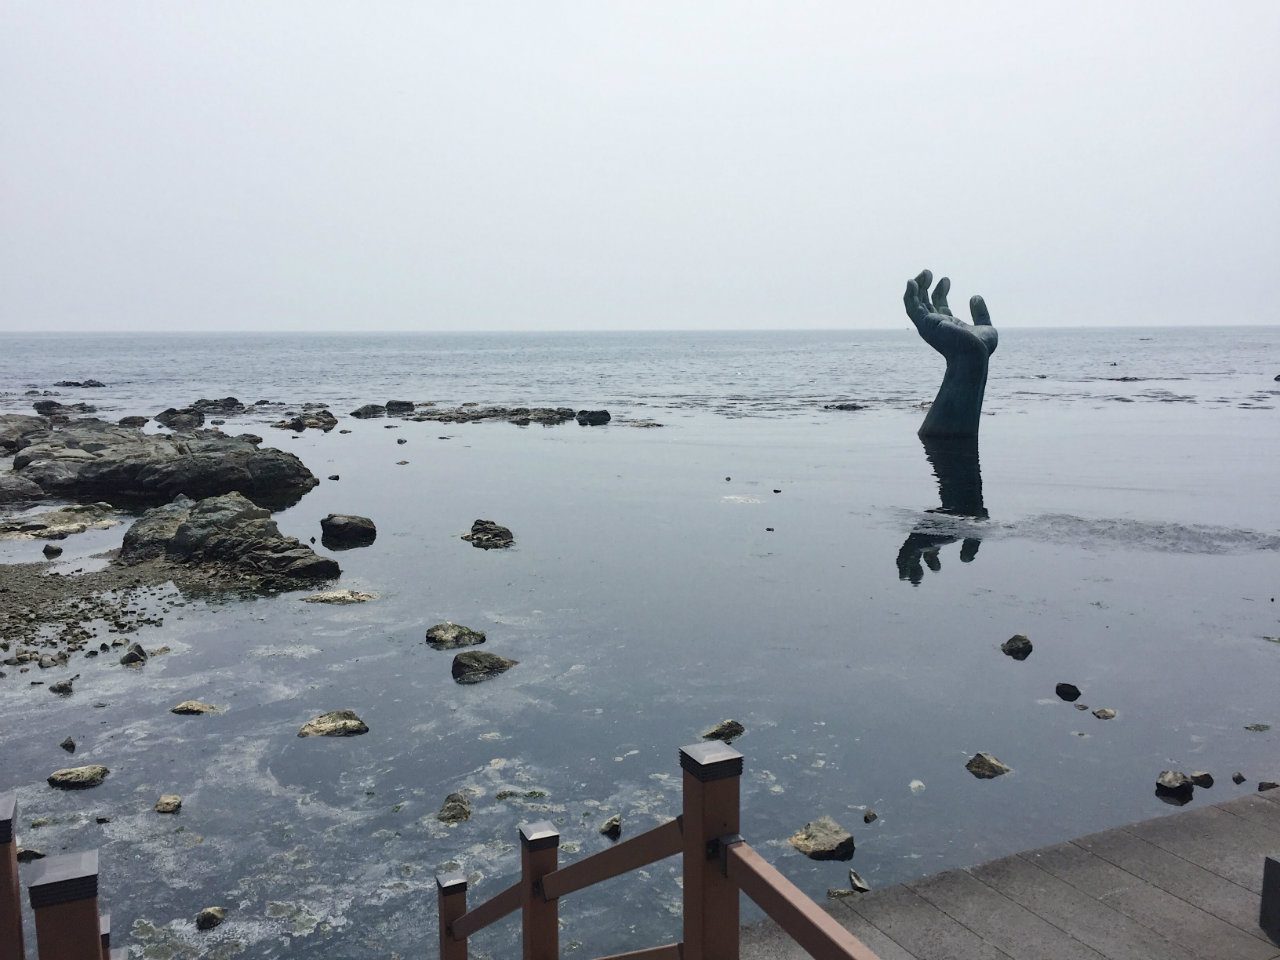 HAND OF SANGSAENG. You can see the famous Hands of Harmony reach for the sky. One is in the ocean, while the other hand is on land. 